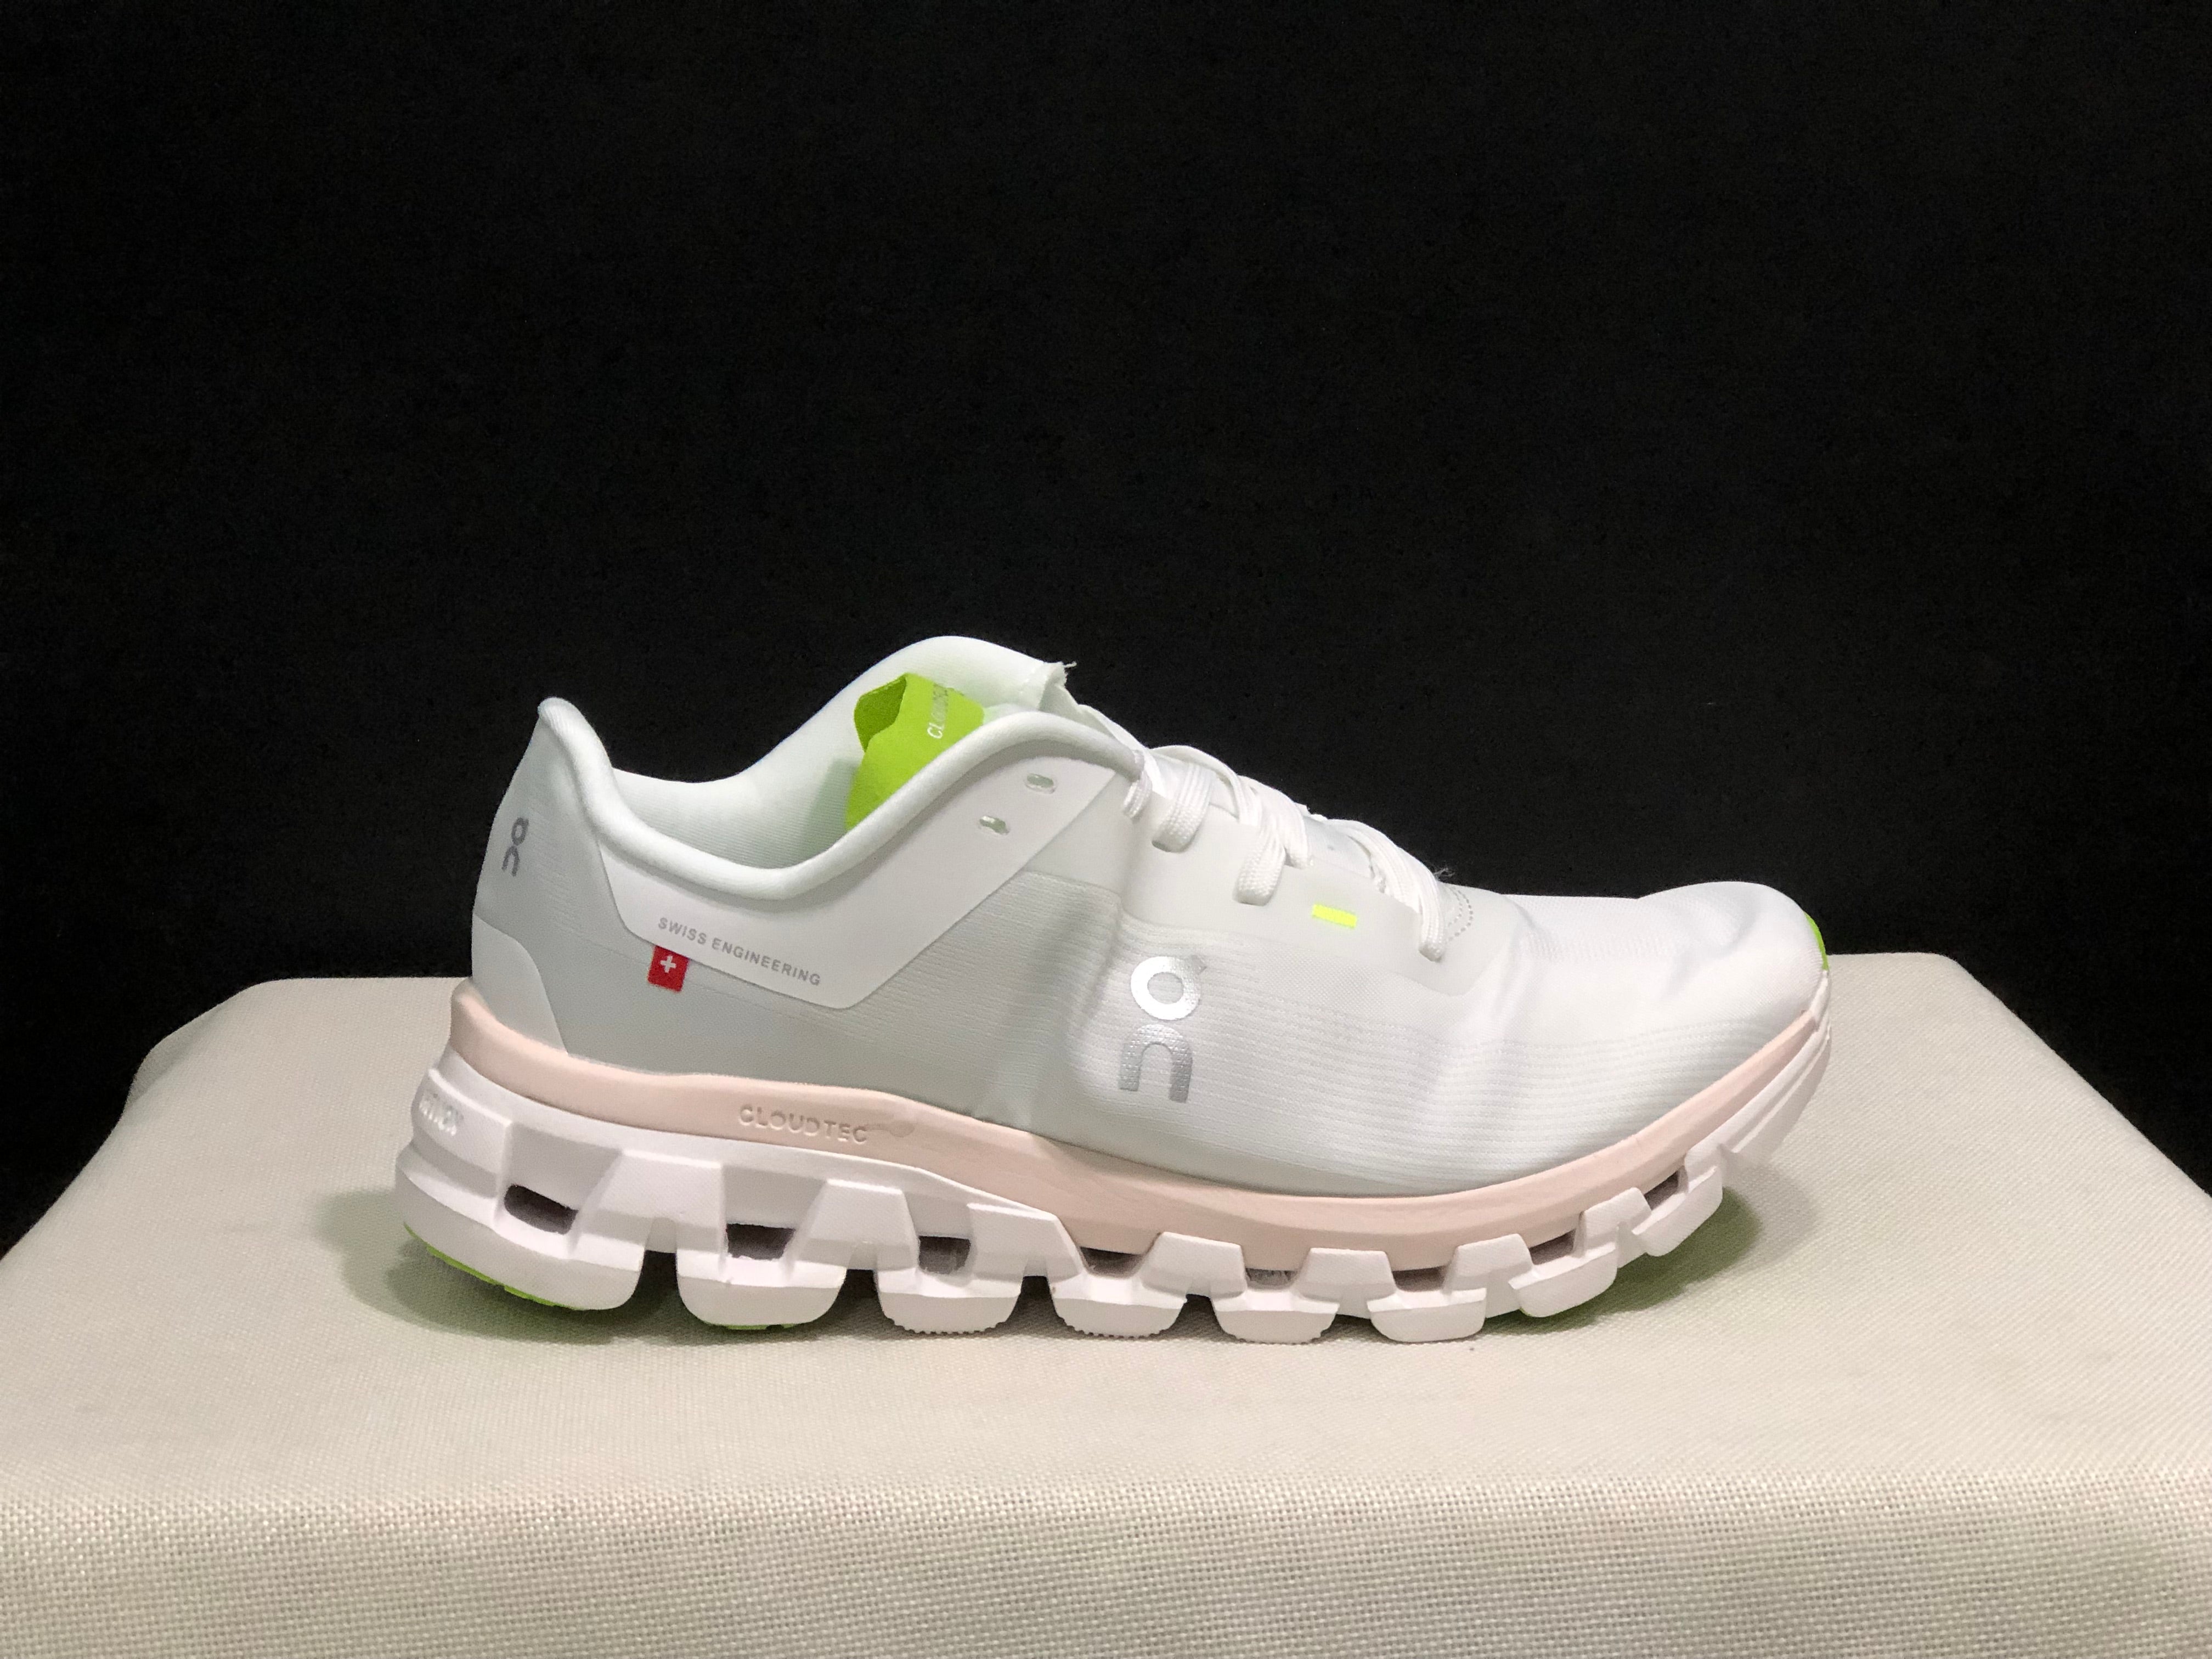 On Cloud Cloudflow 4 New Generation White and green running shoes profile view 